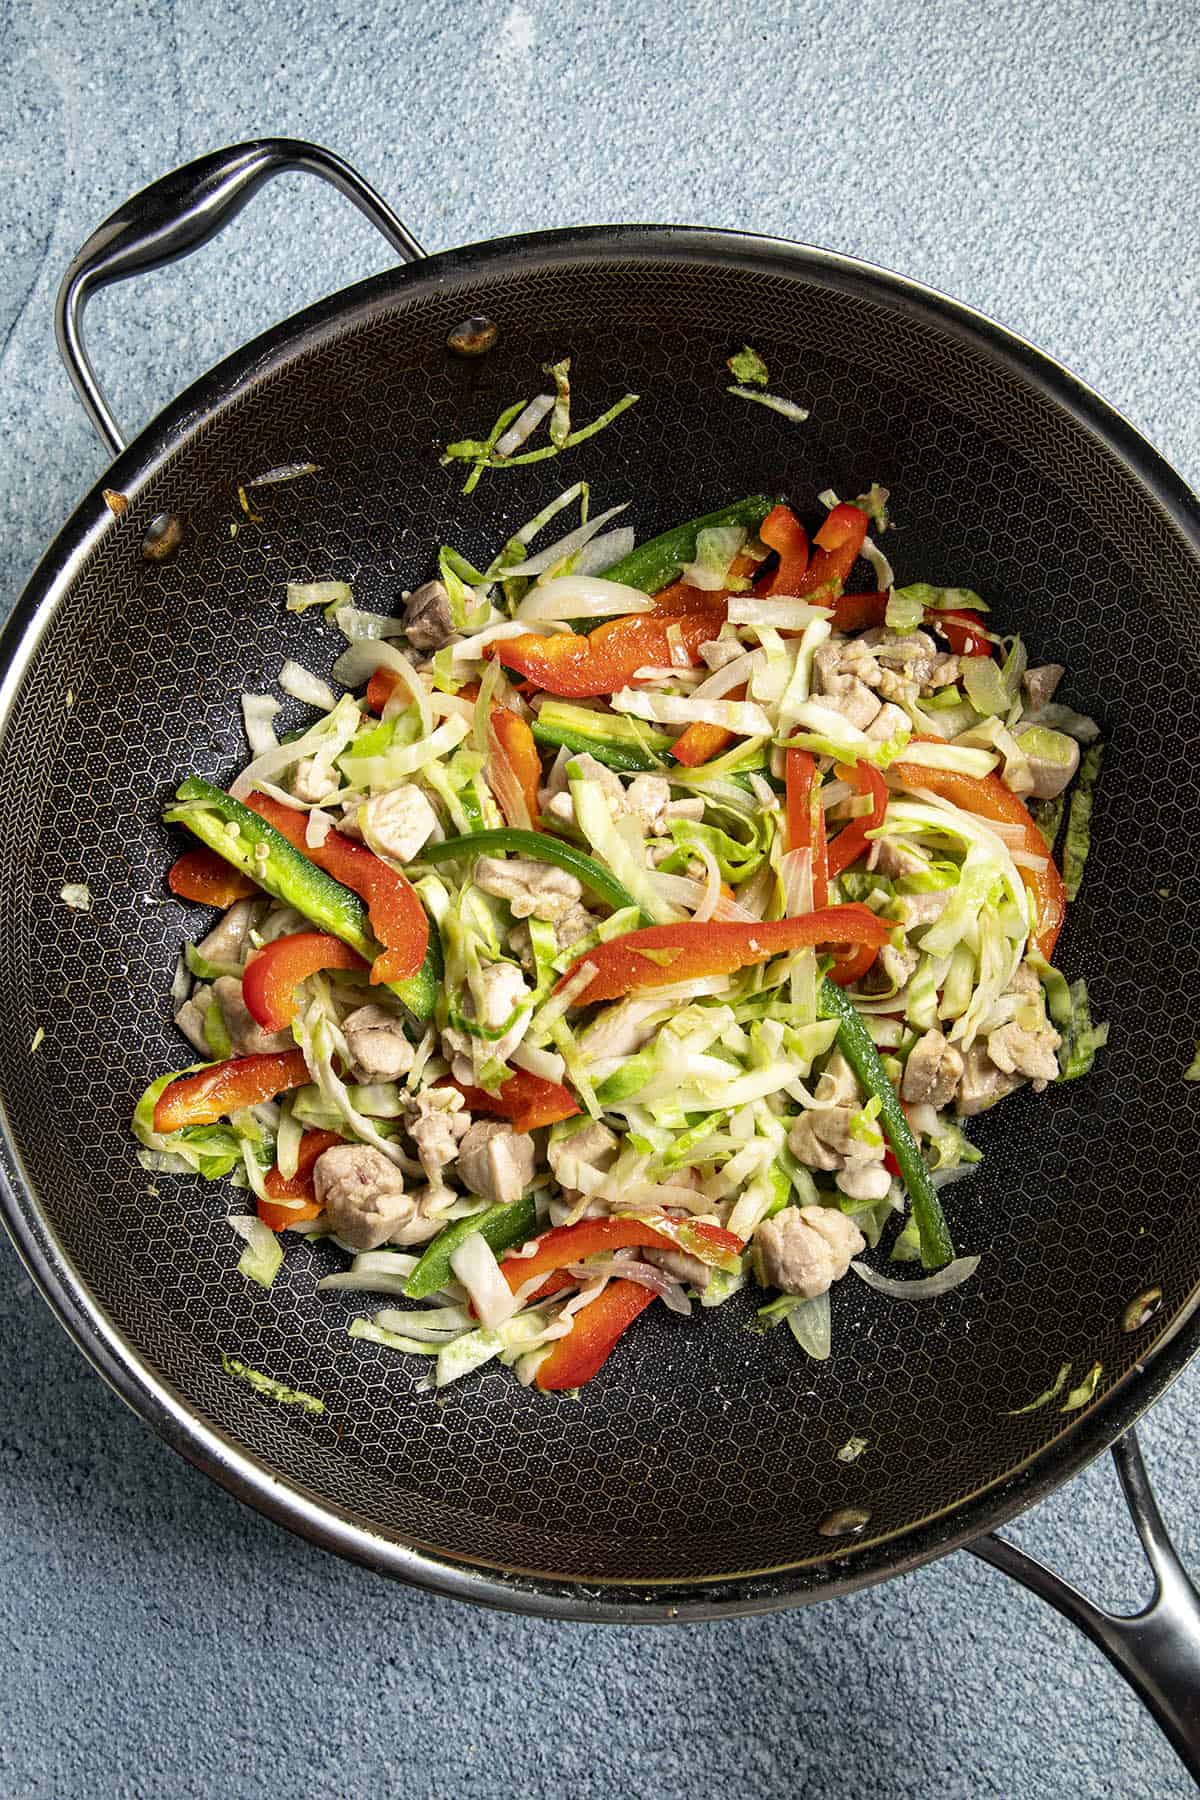 Stir frying the vegetables to make Chow Mein